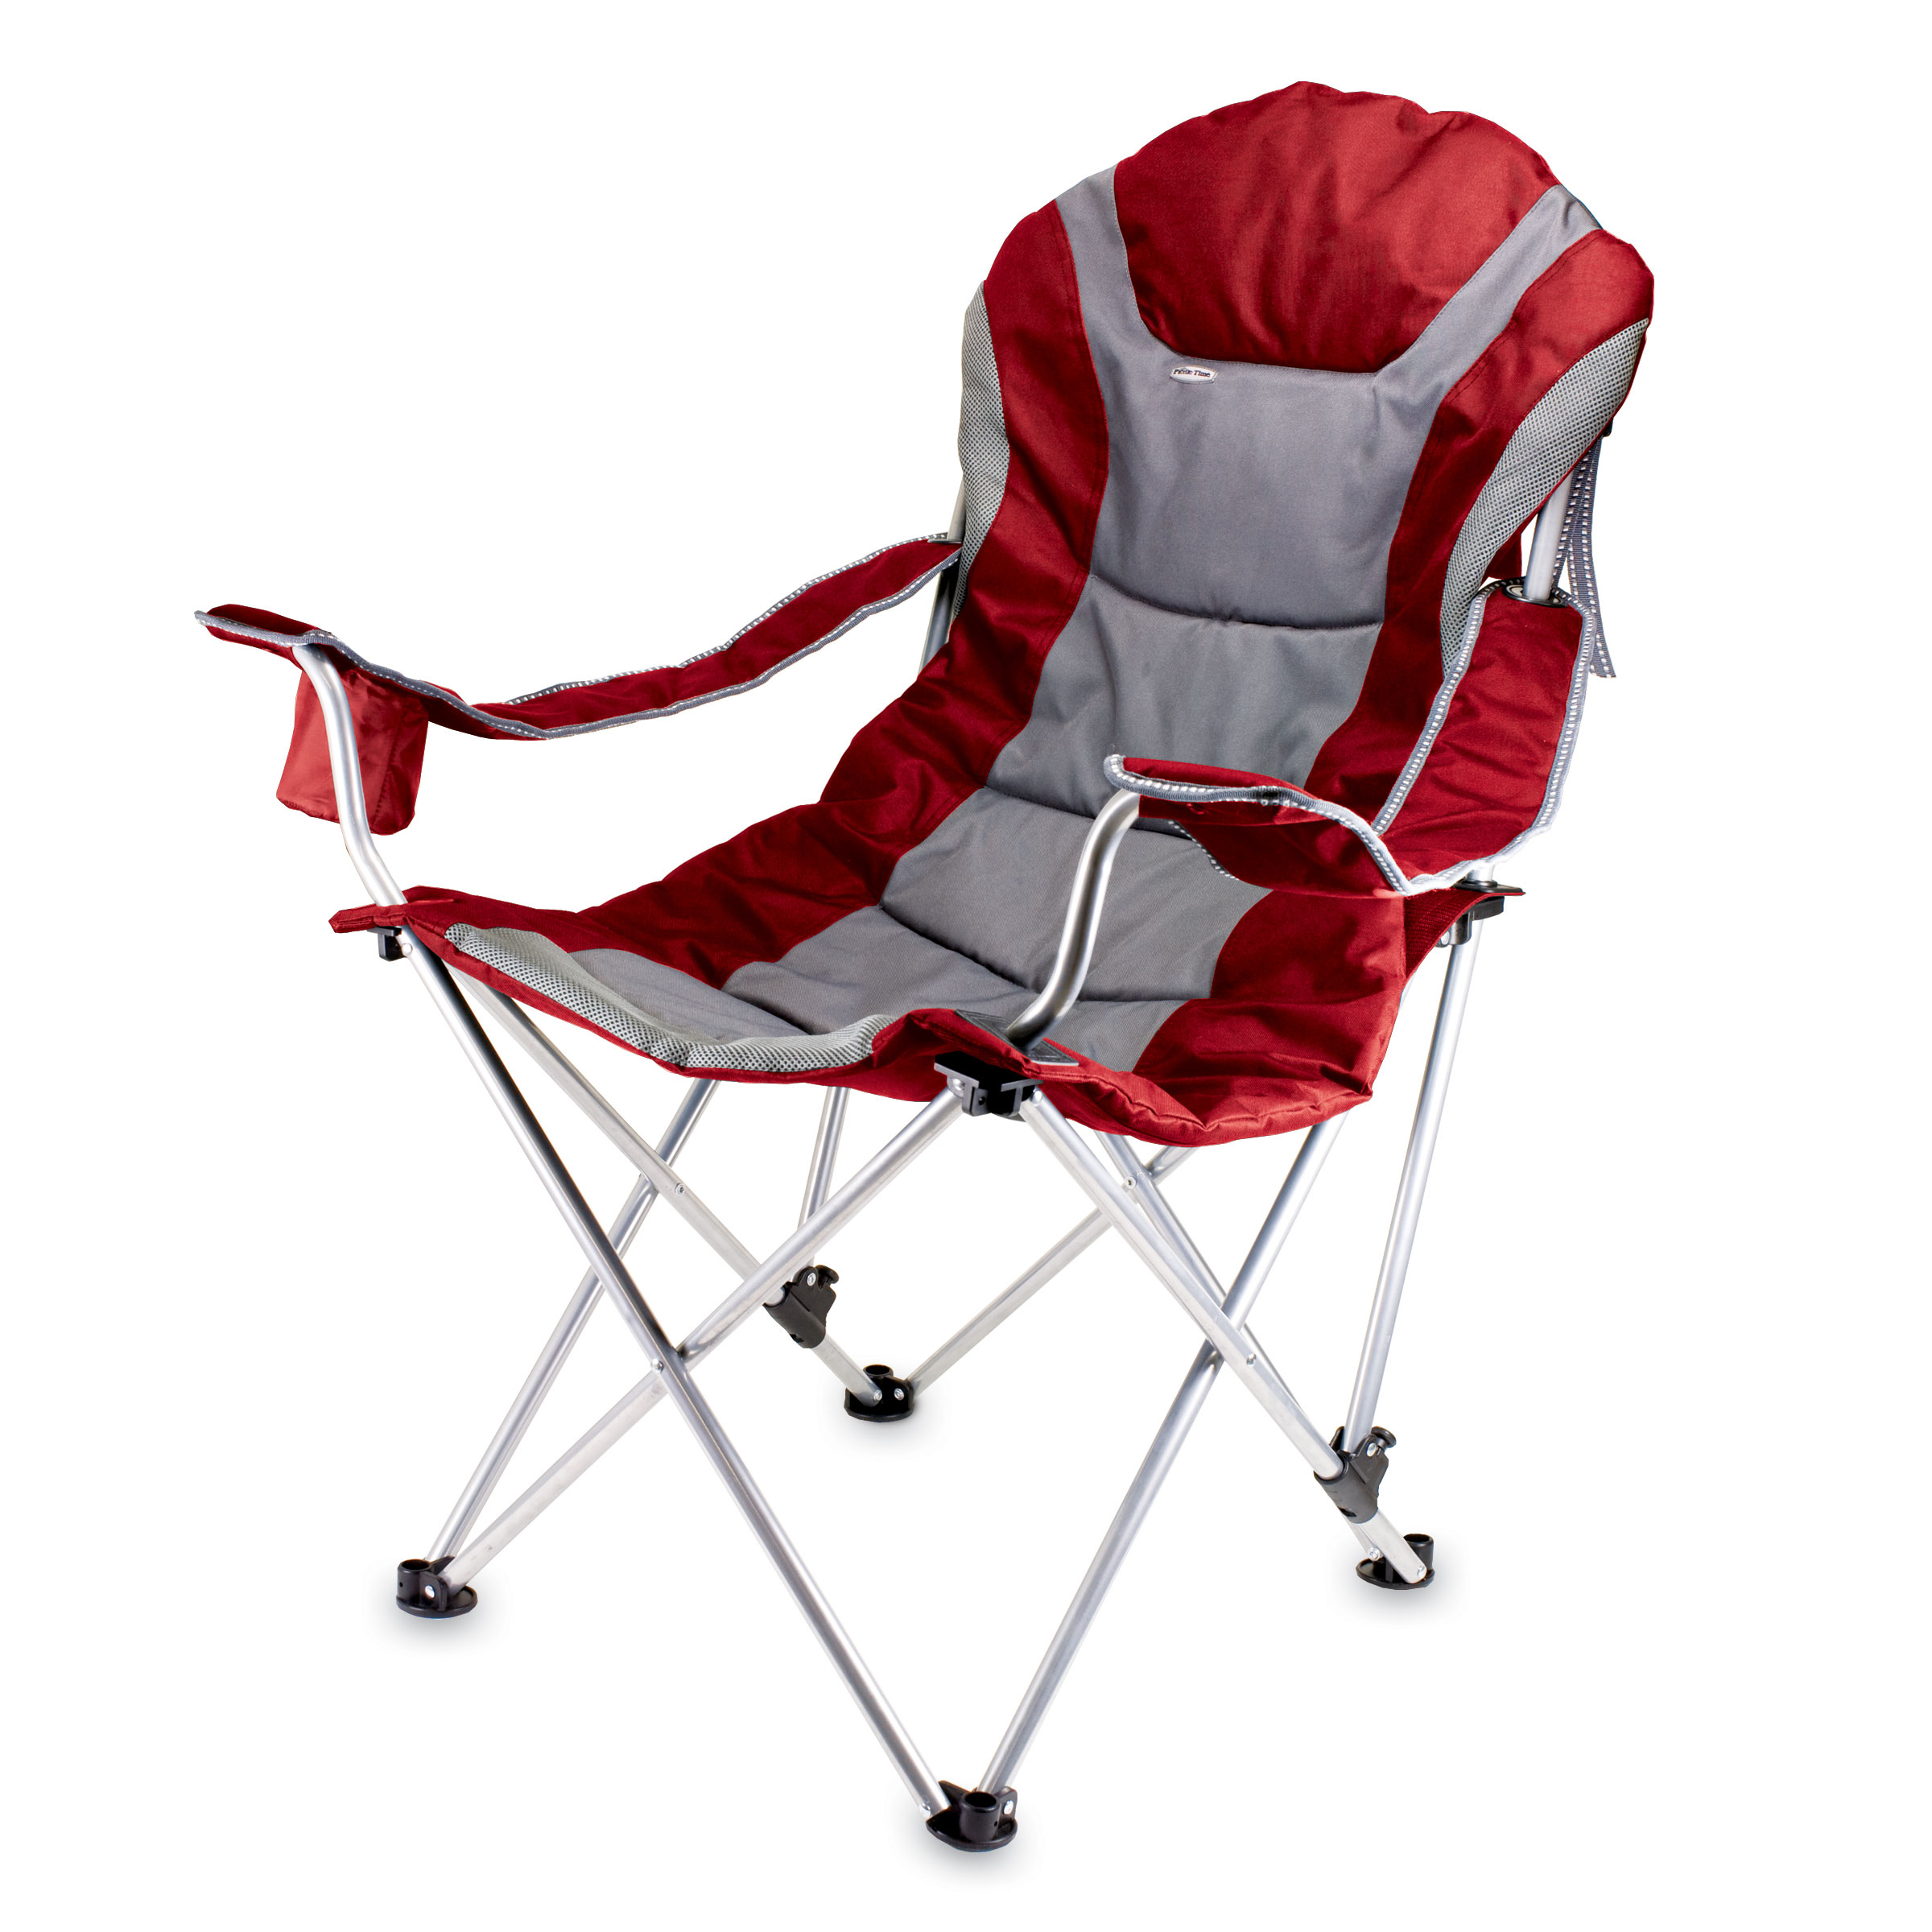 Picnic Time 803-00-100-000-0 Reclining Camp Chair - Red - image 1 of 11